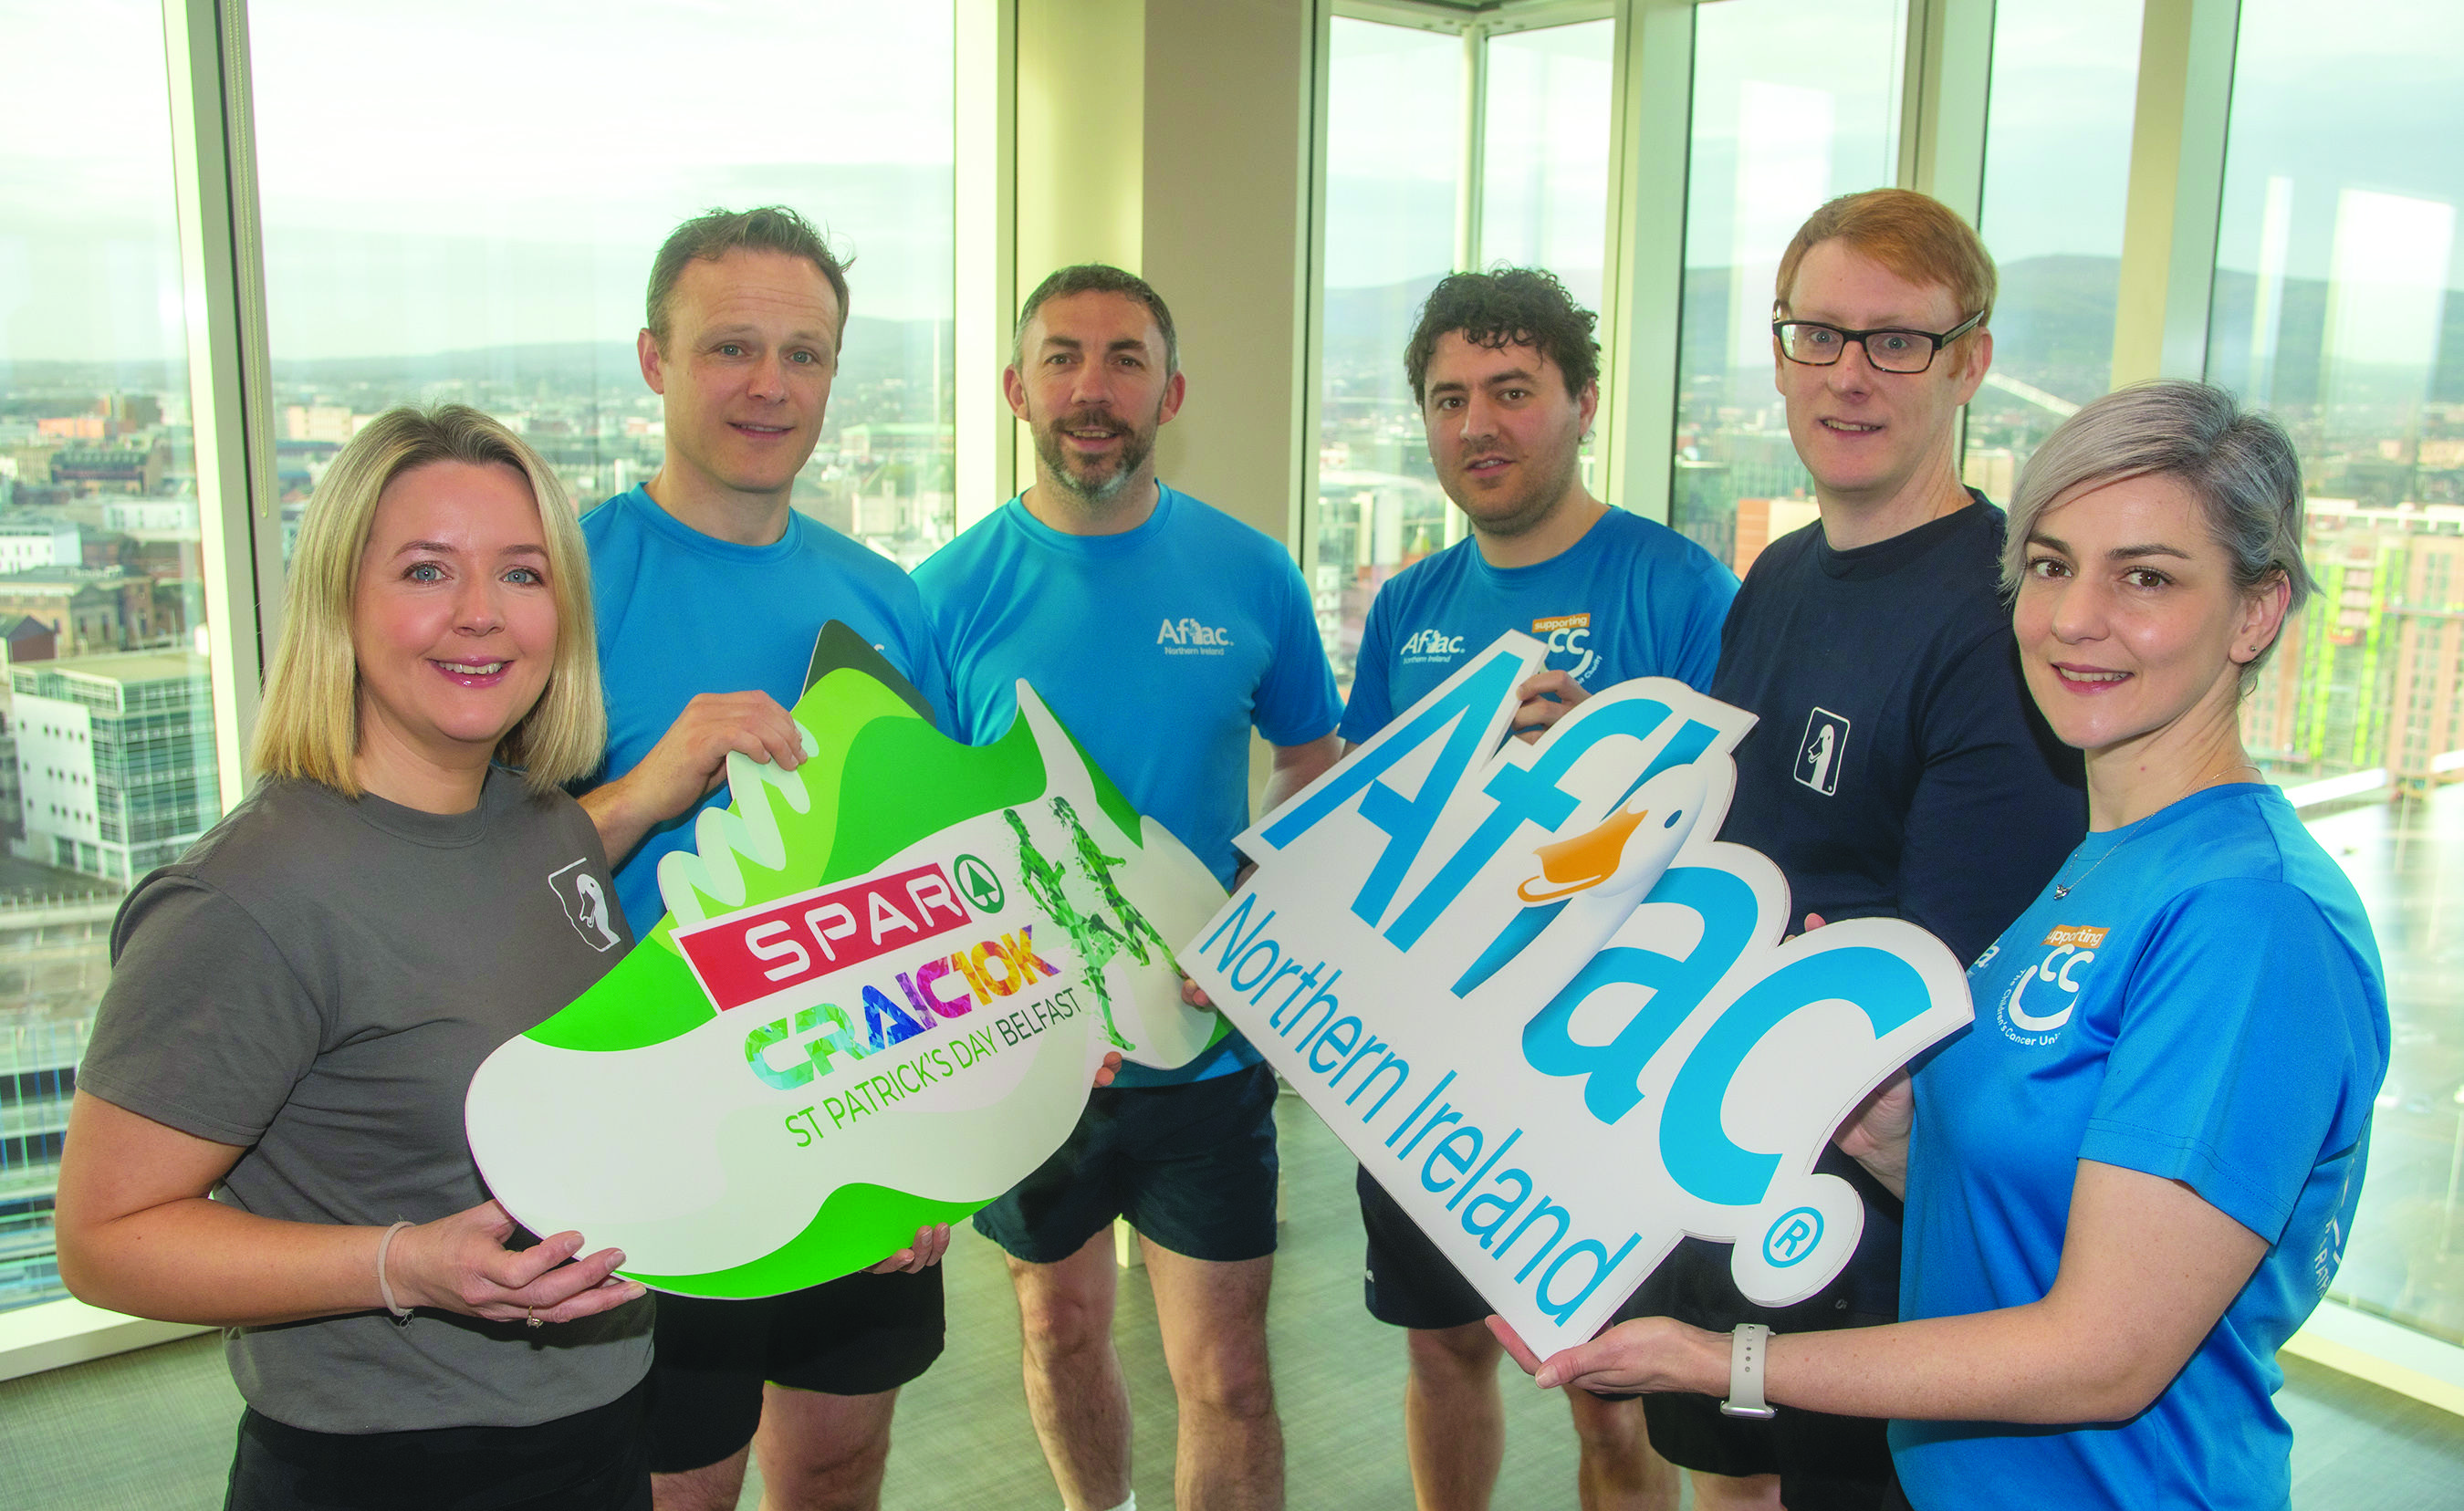 Members of staff at Aflac NI are gearing up for the SPAR Craic 10k